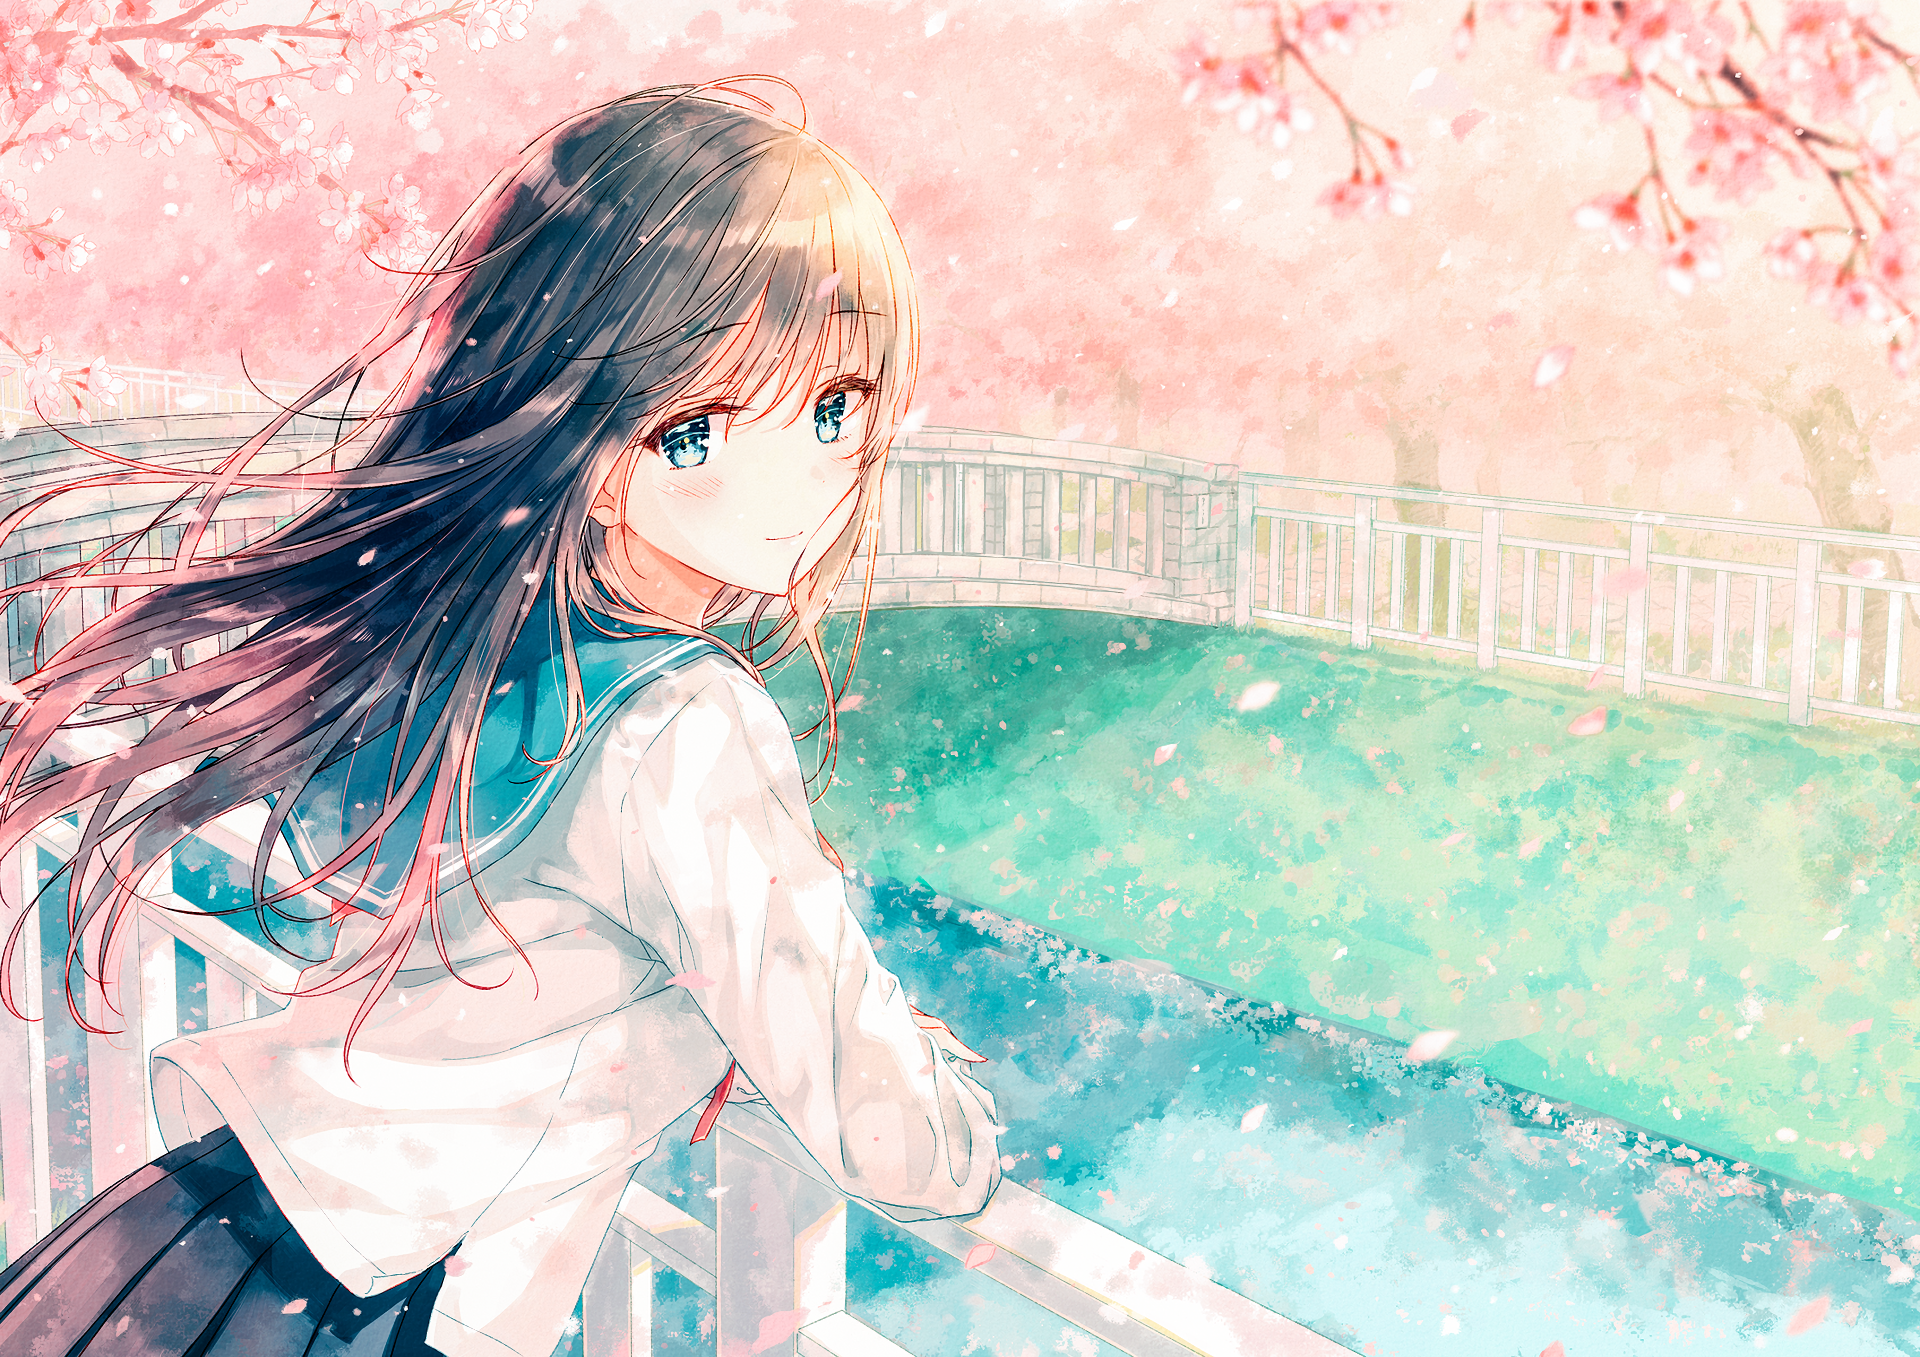 Looking over a river as the cherry blossoms fall by Hiten